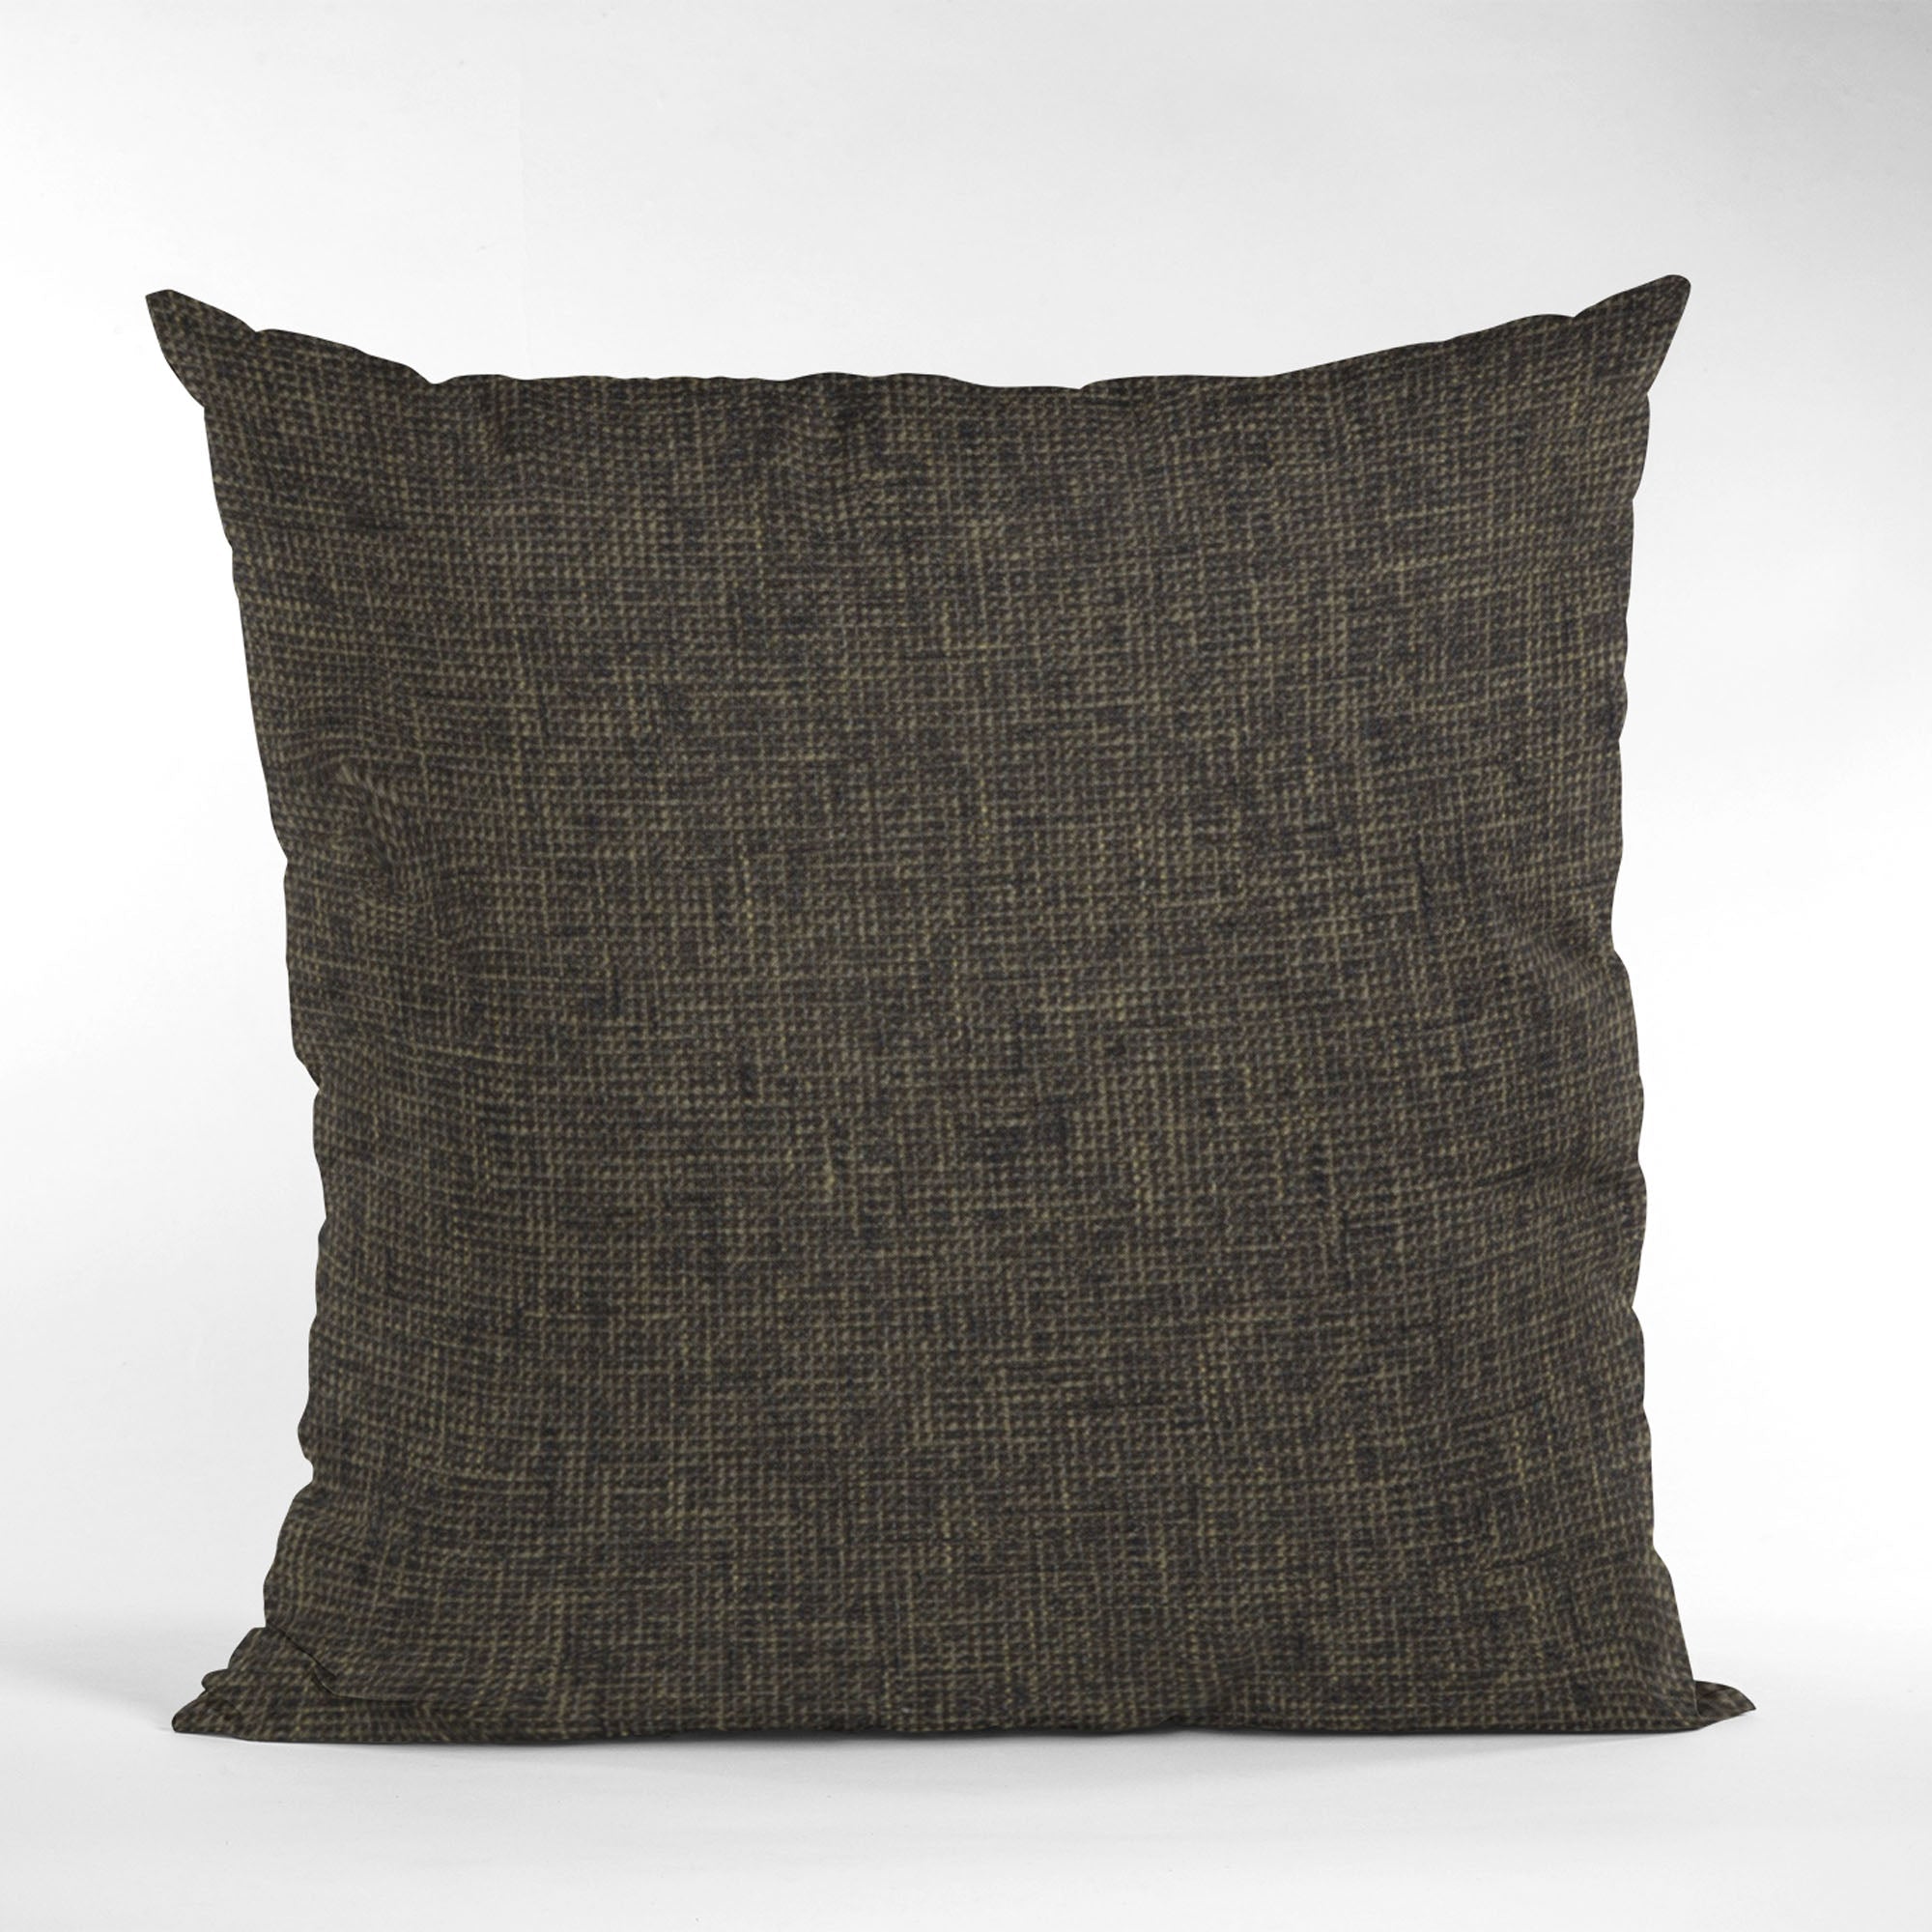 Plutus Espresso Waffle Textured Solid, Sort Of A Waffle Texture Luxury Throw Pillow-4